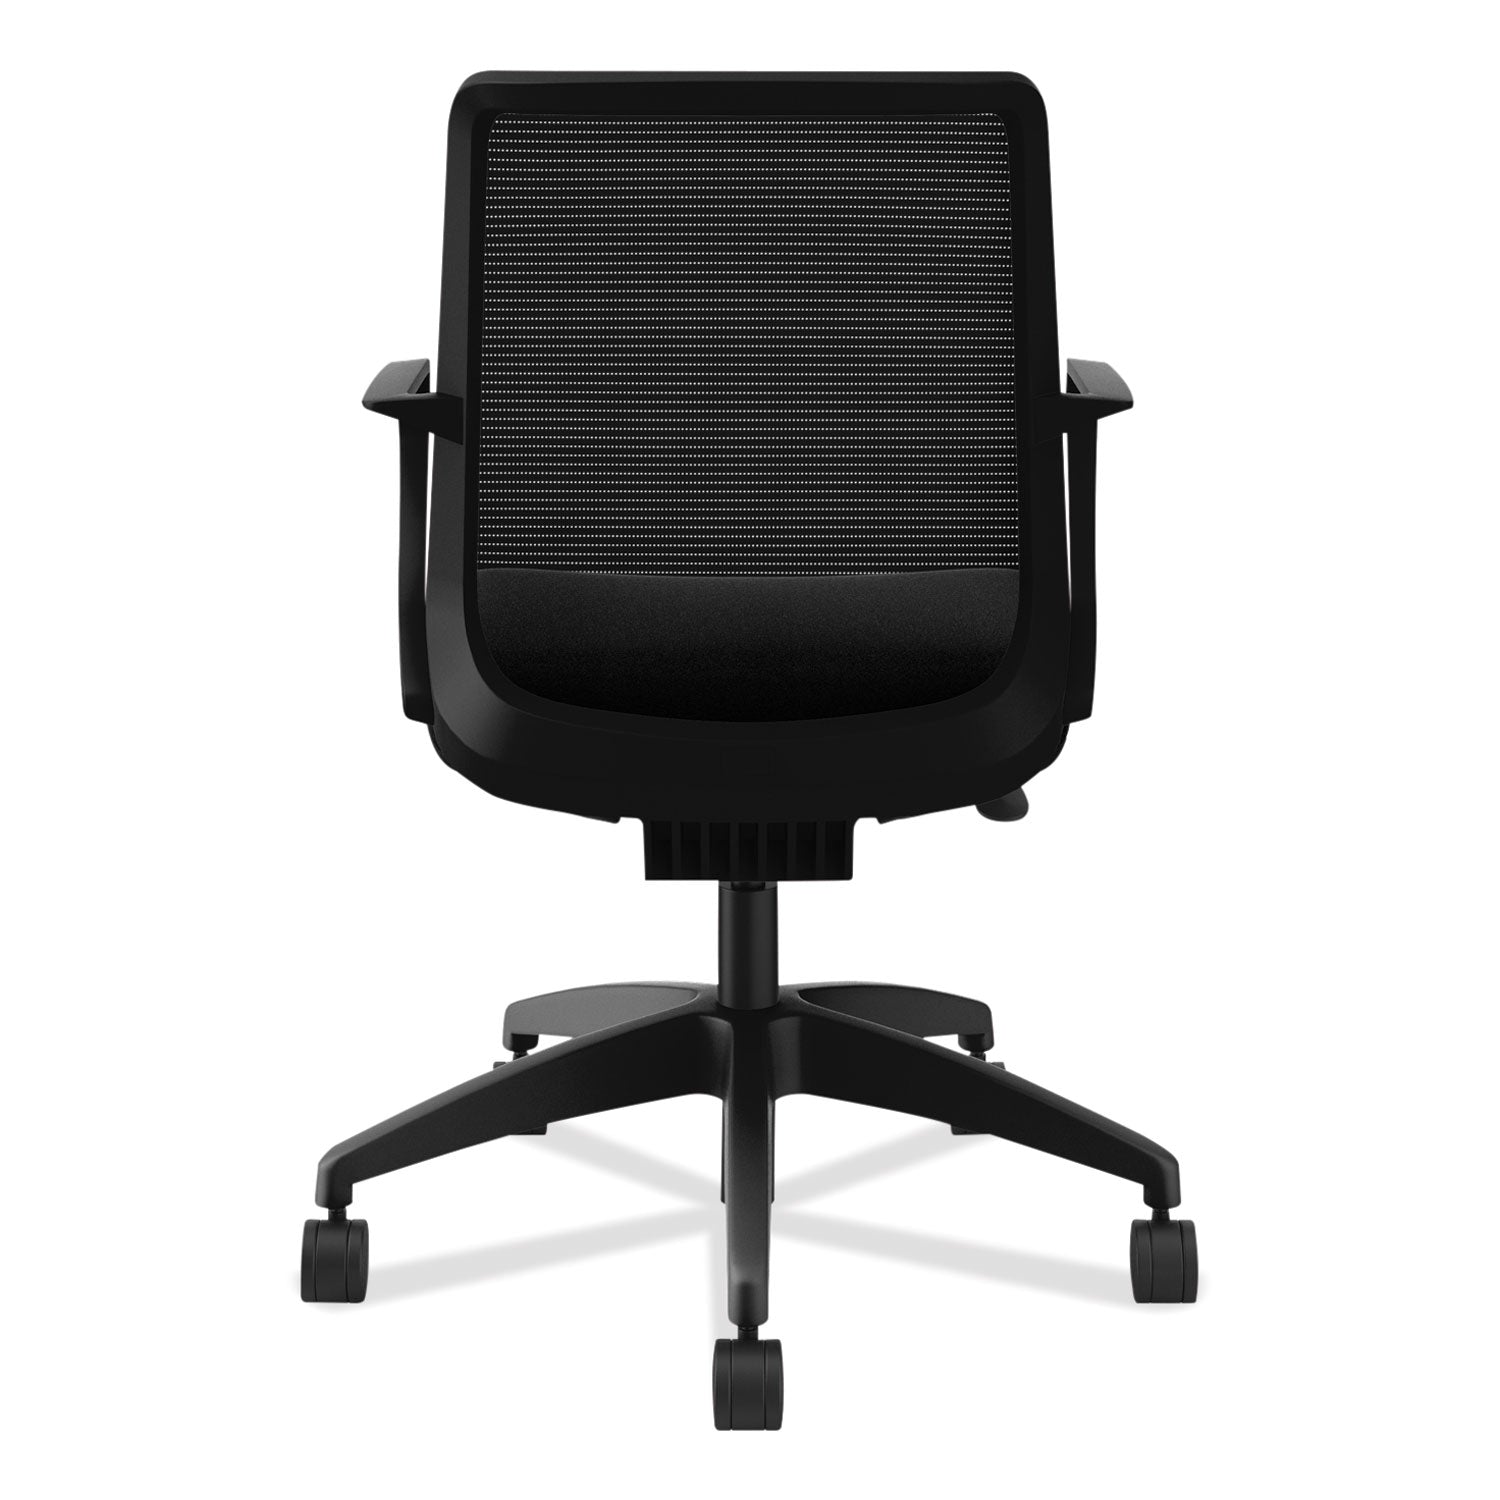 cliq-office-chair-supports-up-to-300-lb-17-to-22-seat-height-black-seat-back-black-base-ships-in-7-10-business-days_honclqimcu10t - 5